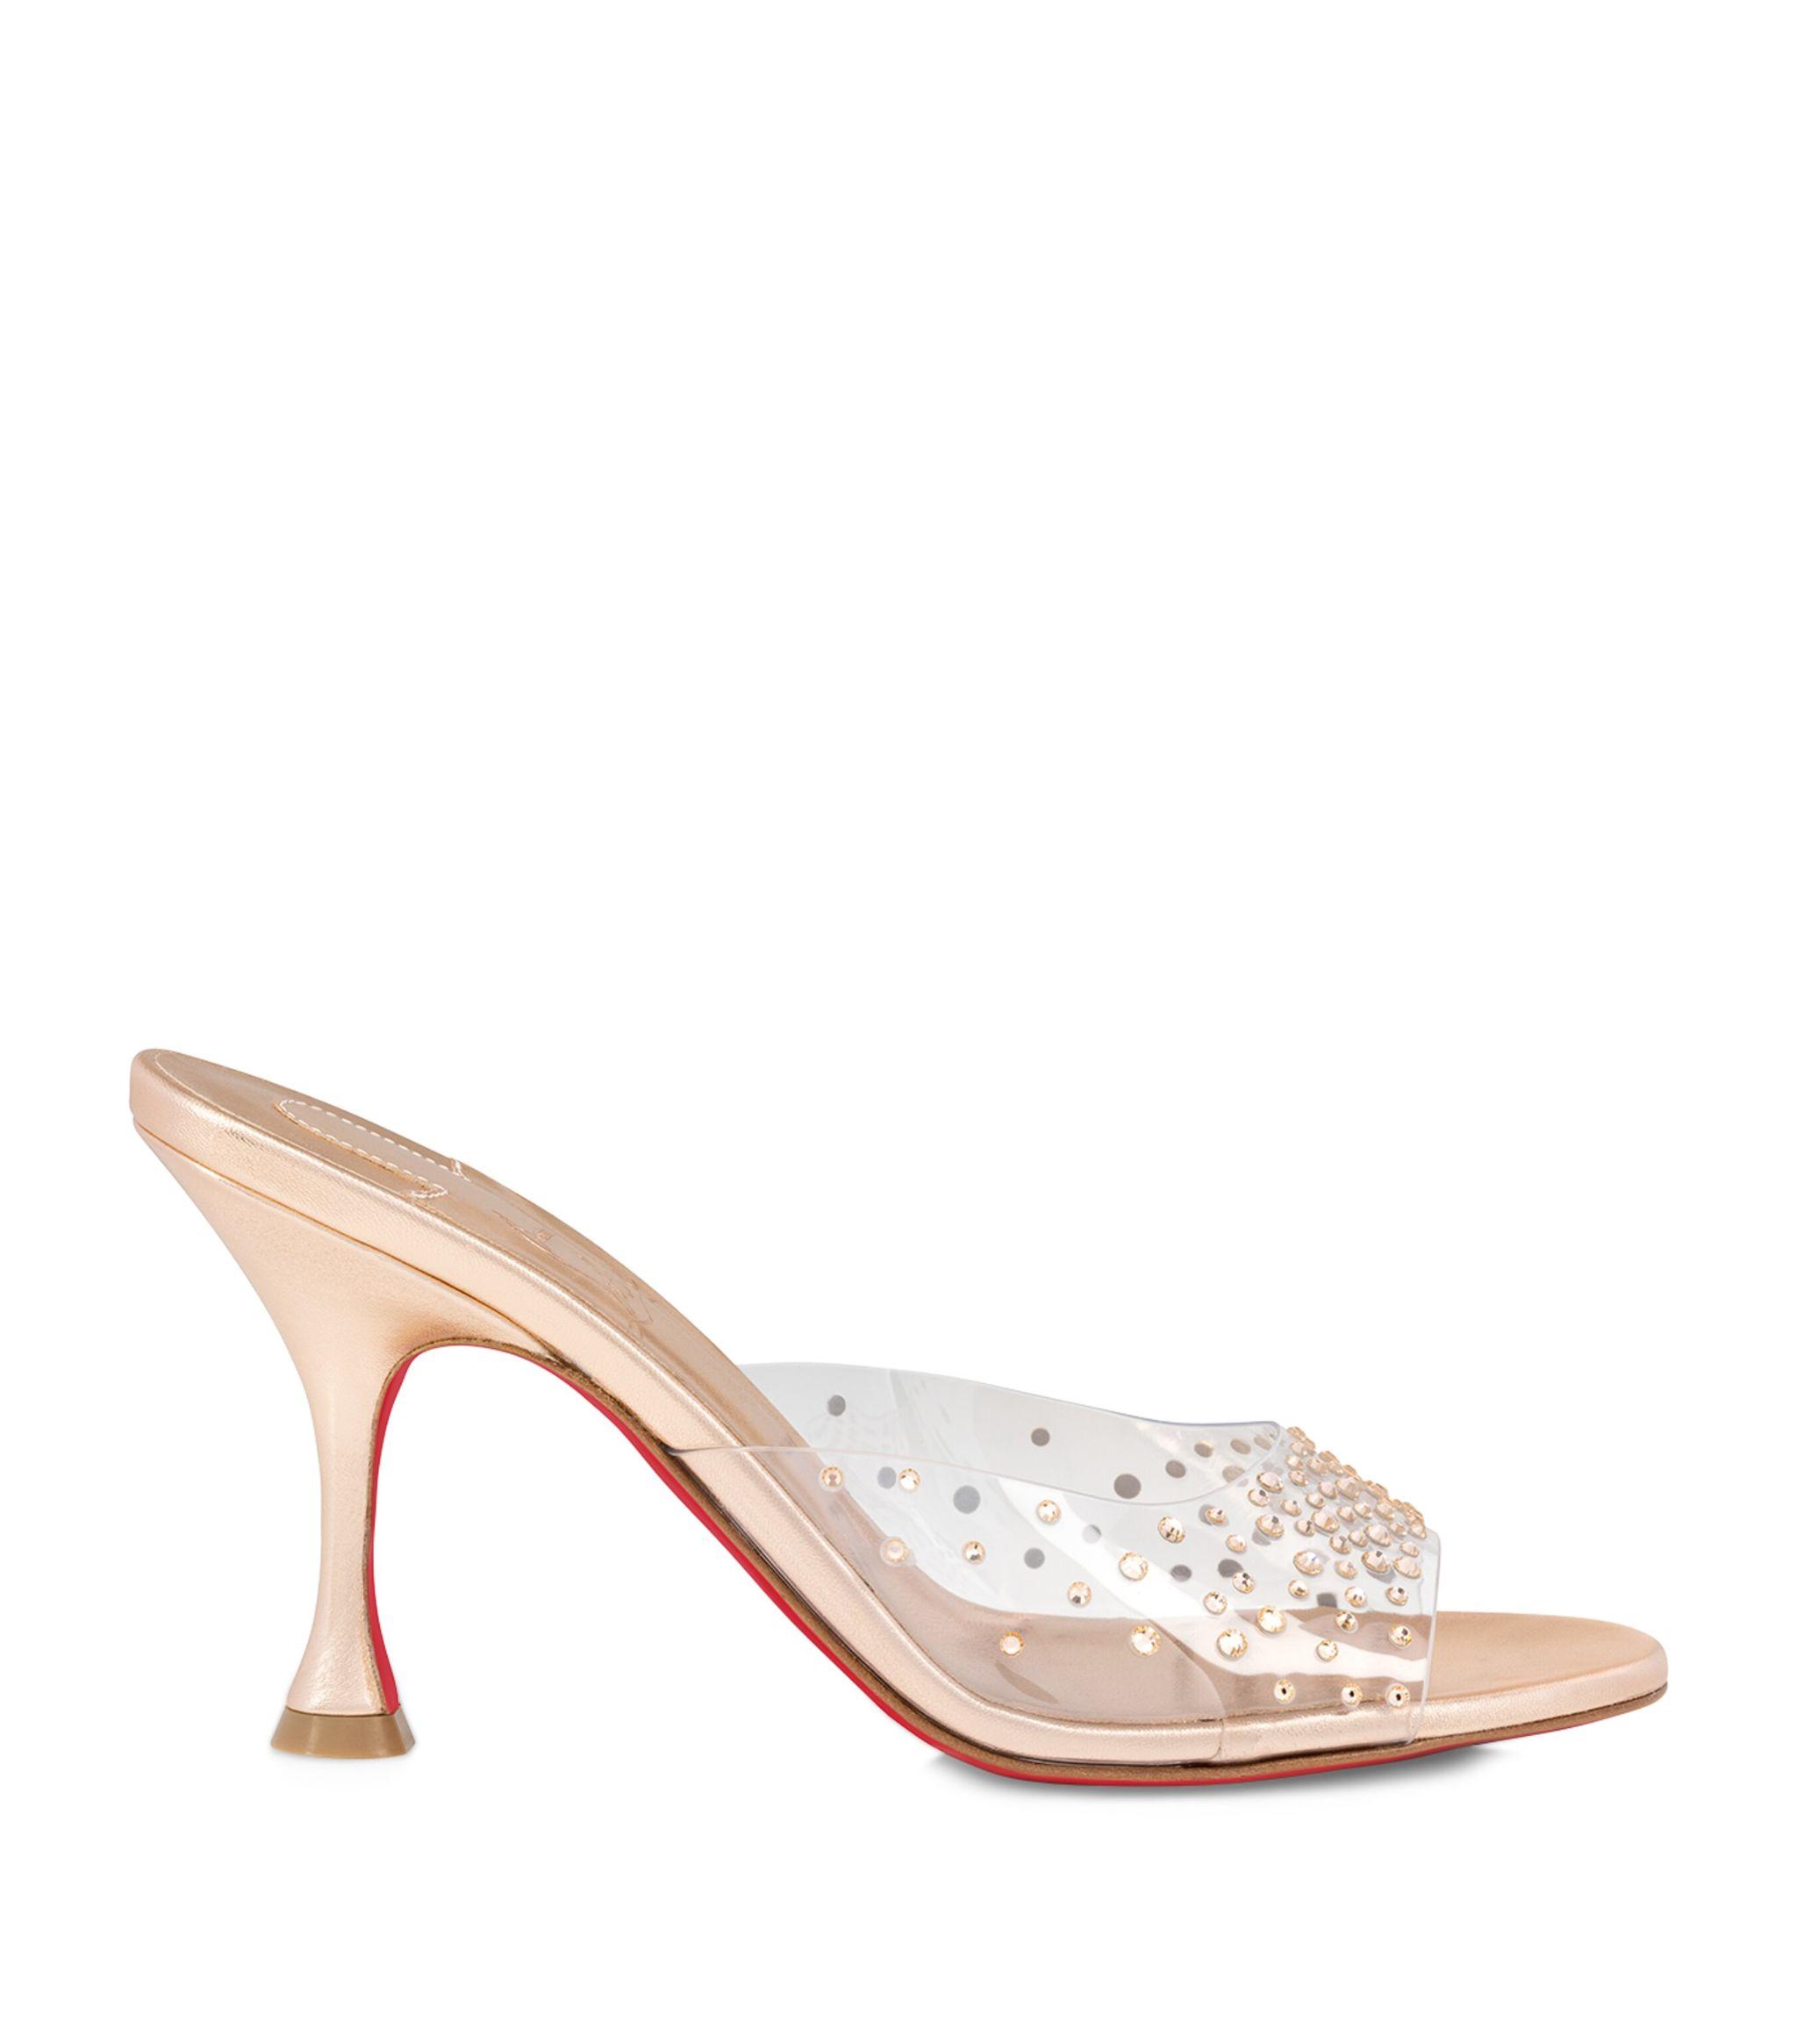 Christian Louboutin Degramule Strass Mules 85 in Natural | Lyst